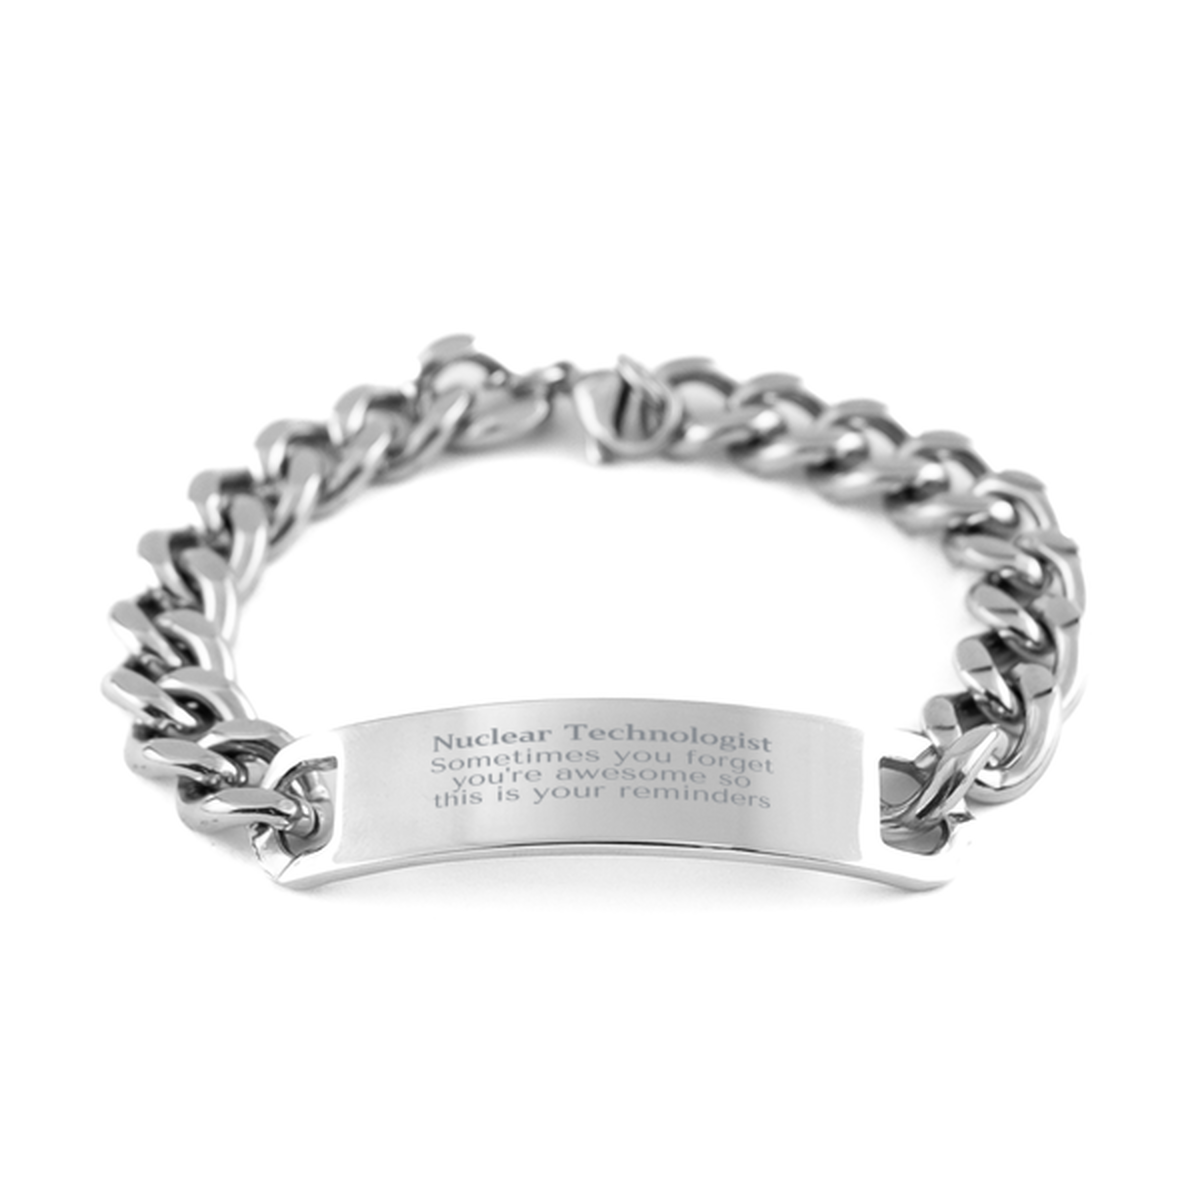 Sentimental Nuclear Technologist Cuban Chain Stainless Steel Bracelet, Nuclear Technologist Sometimes you forget you're awesome so this is your reminders, Graduation Christmas Birthday Gifts for Nuclear Technologist, Men, Women, Coworkers